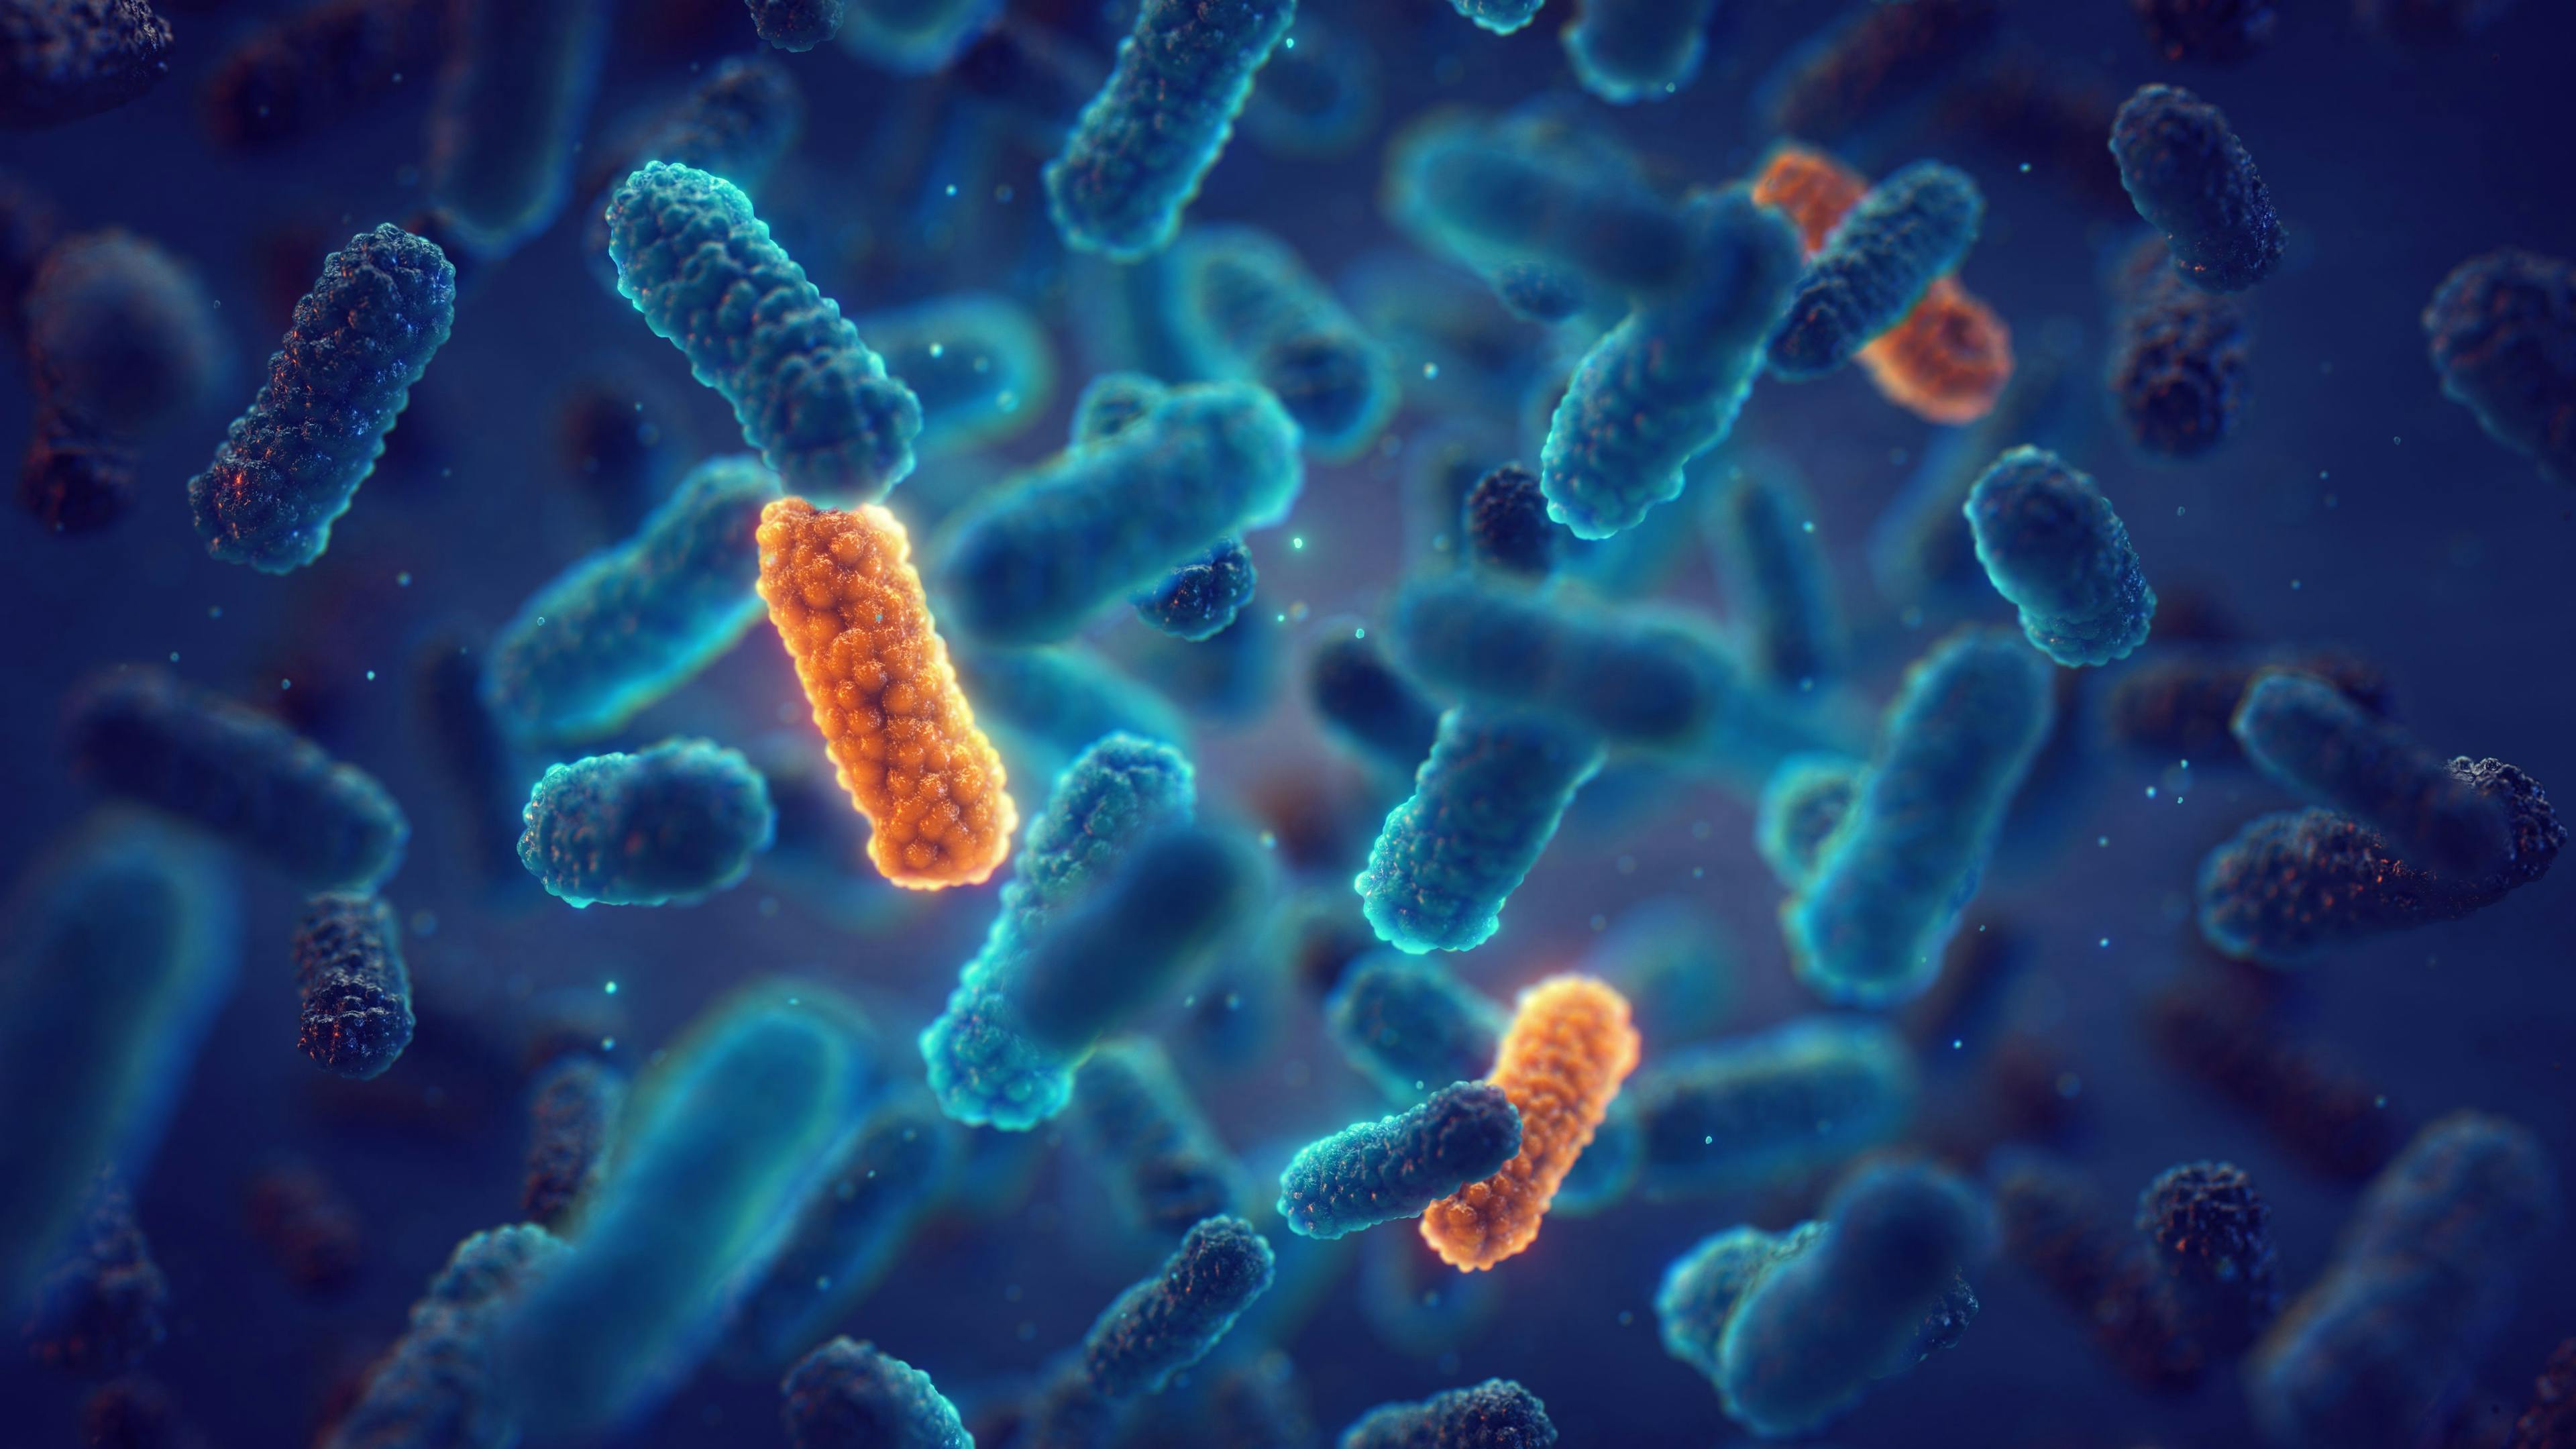 Fecal Microbiota Transplantation Could Be the Answer to the Global Threat of Antimicrobial Resistance